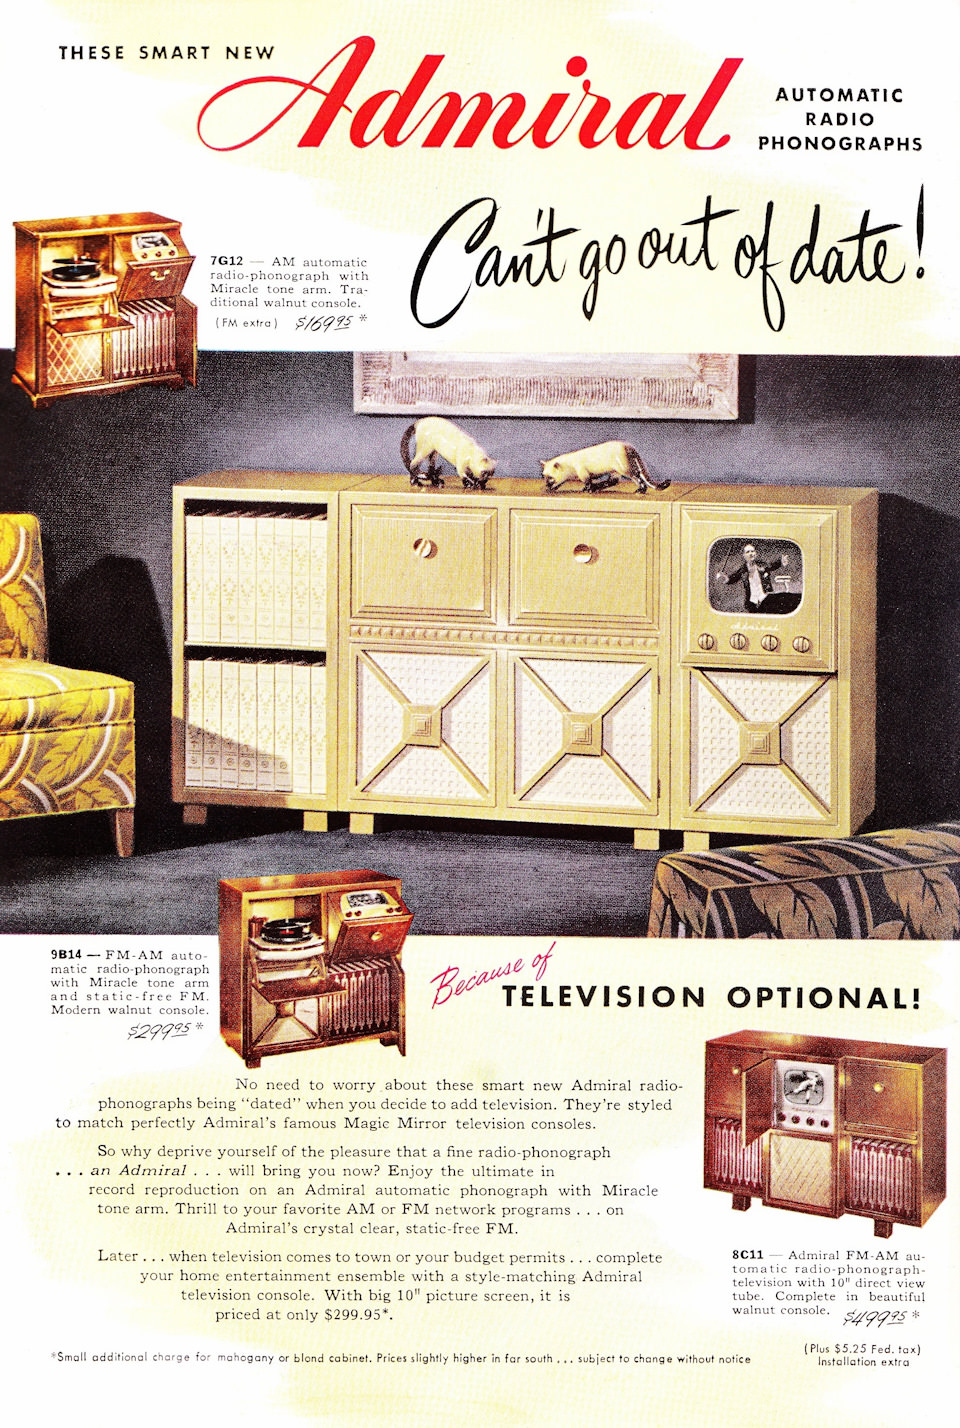 Vintage Ads of Admiral Televisions From the 1950s